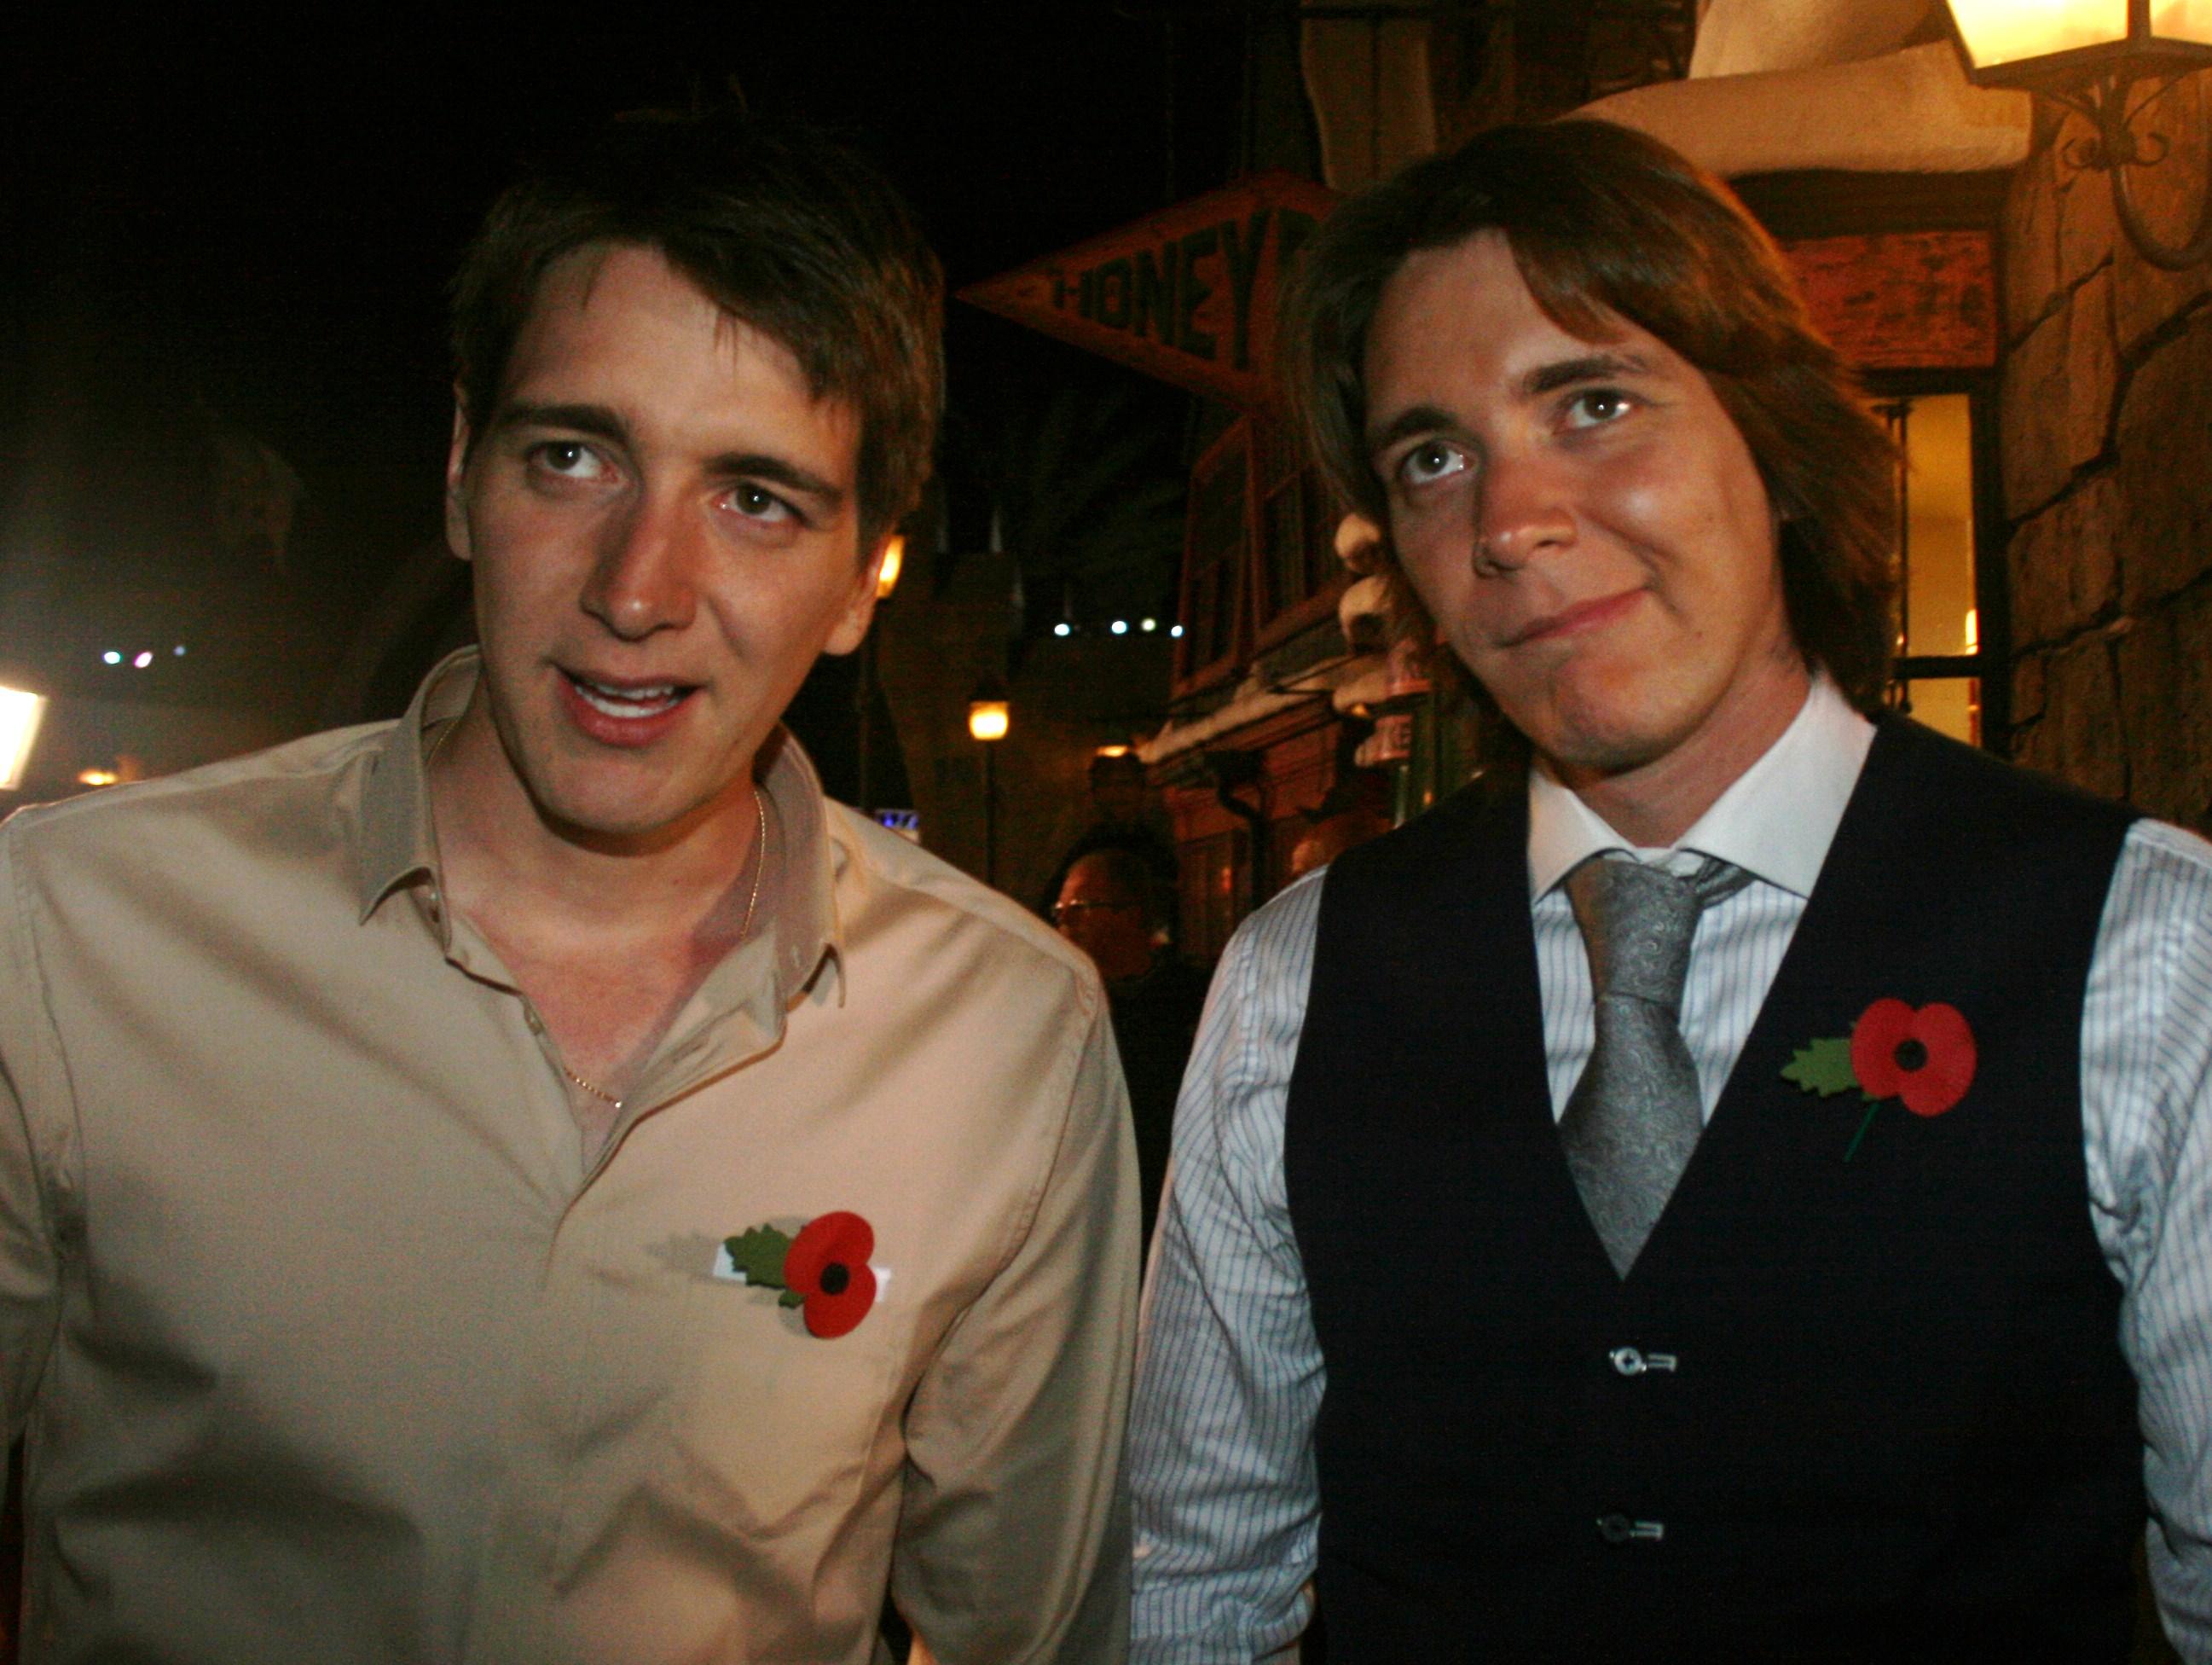 JAMES & OLIVER PHELPS- Fred & George Weasley. BEYOND THE MARQUEE